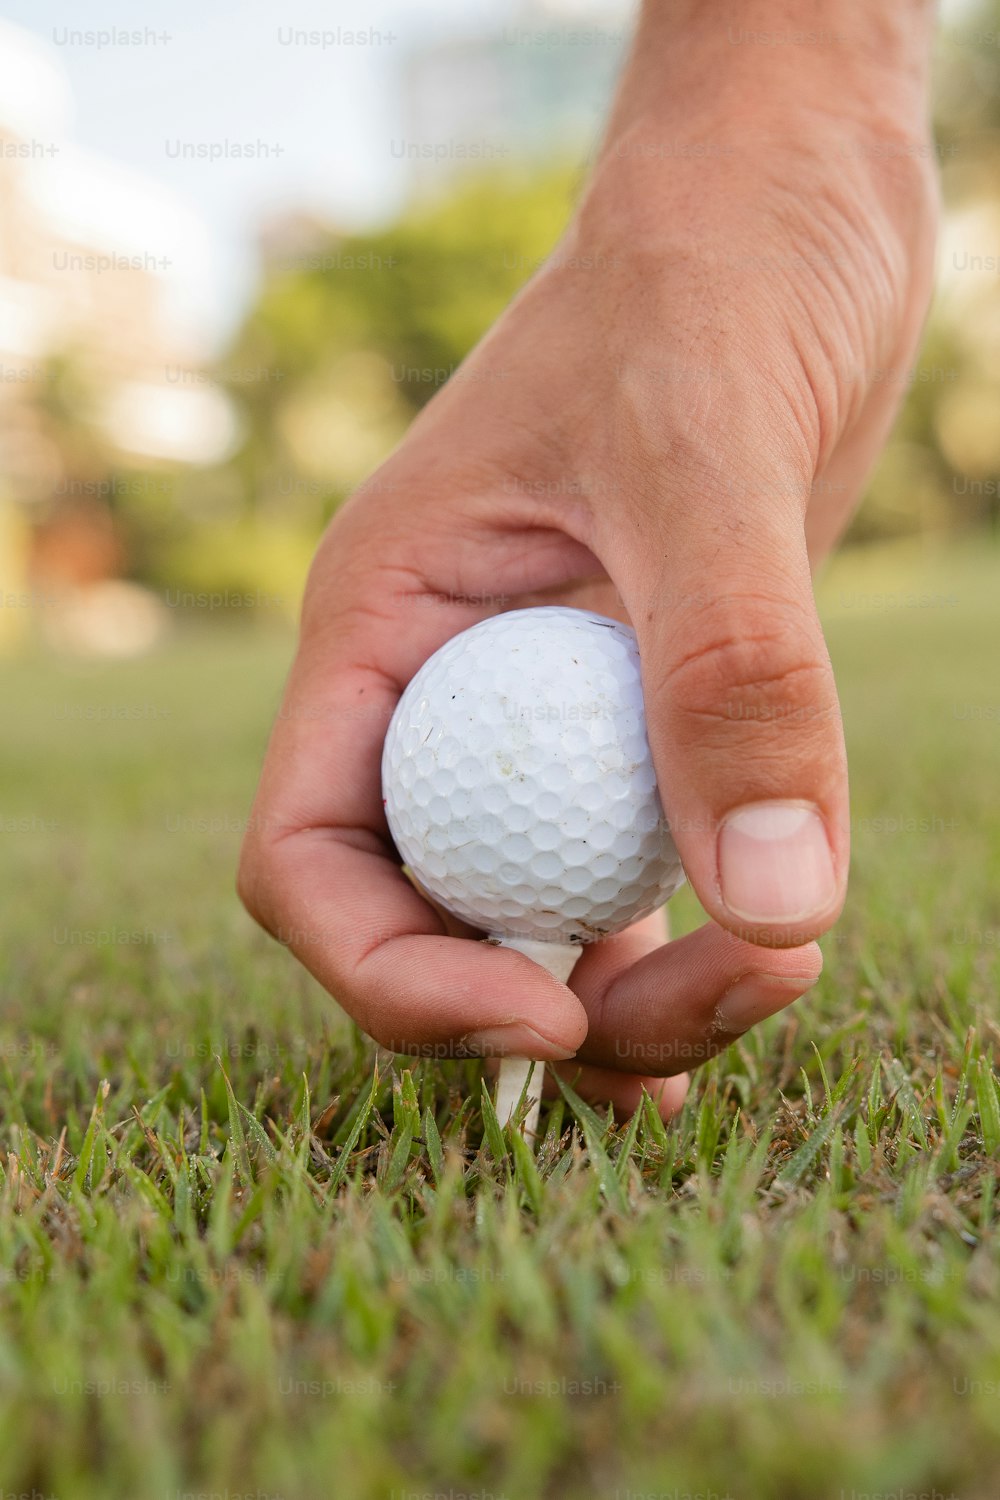 a person holding a golf ball in their hand